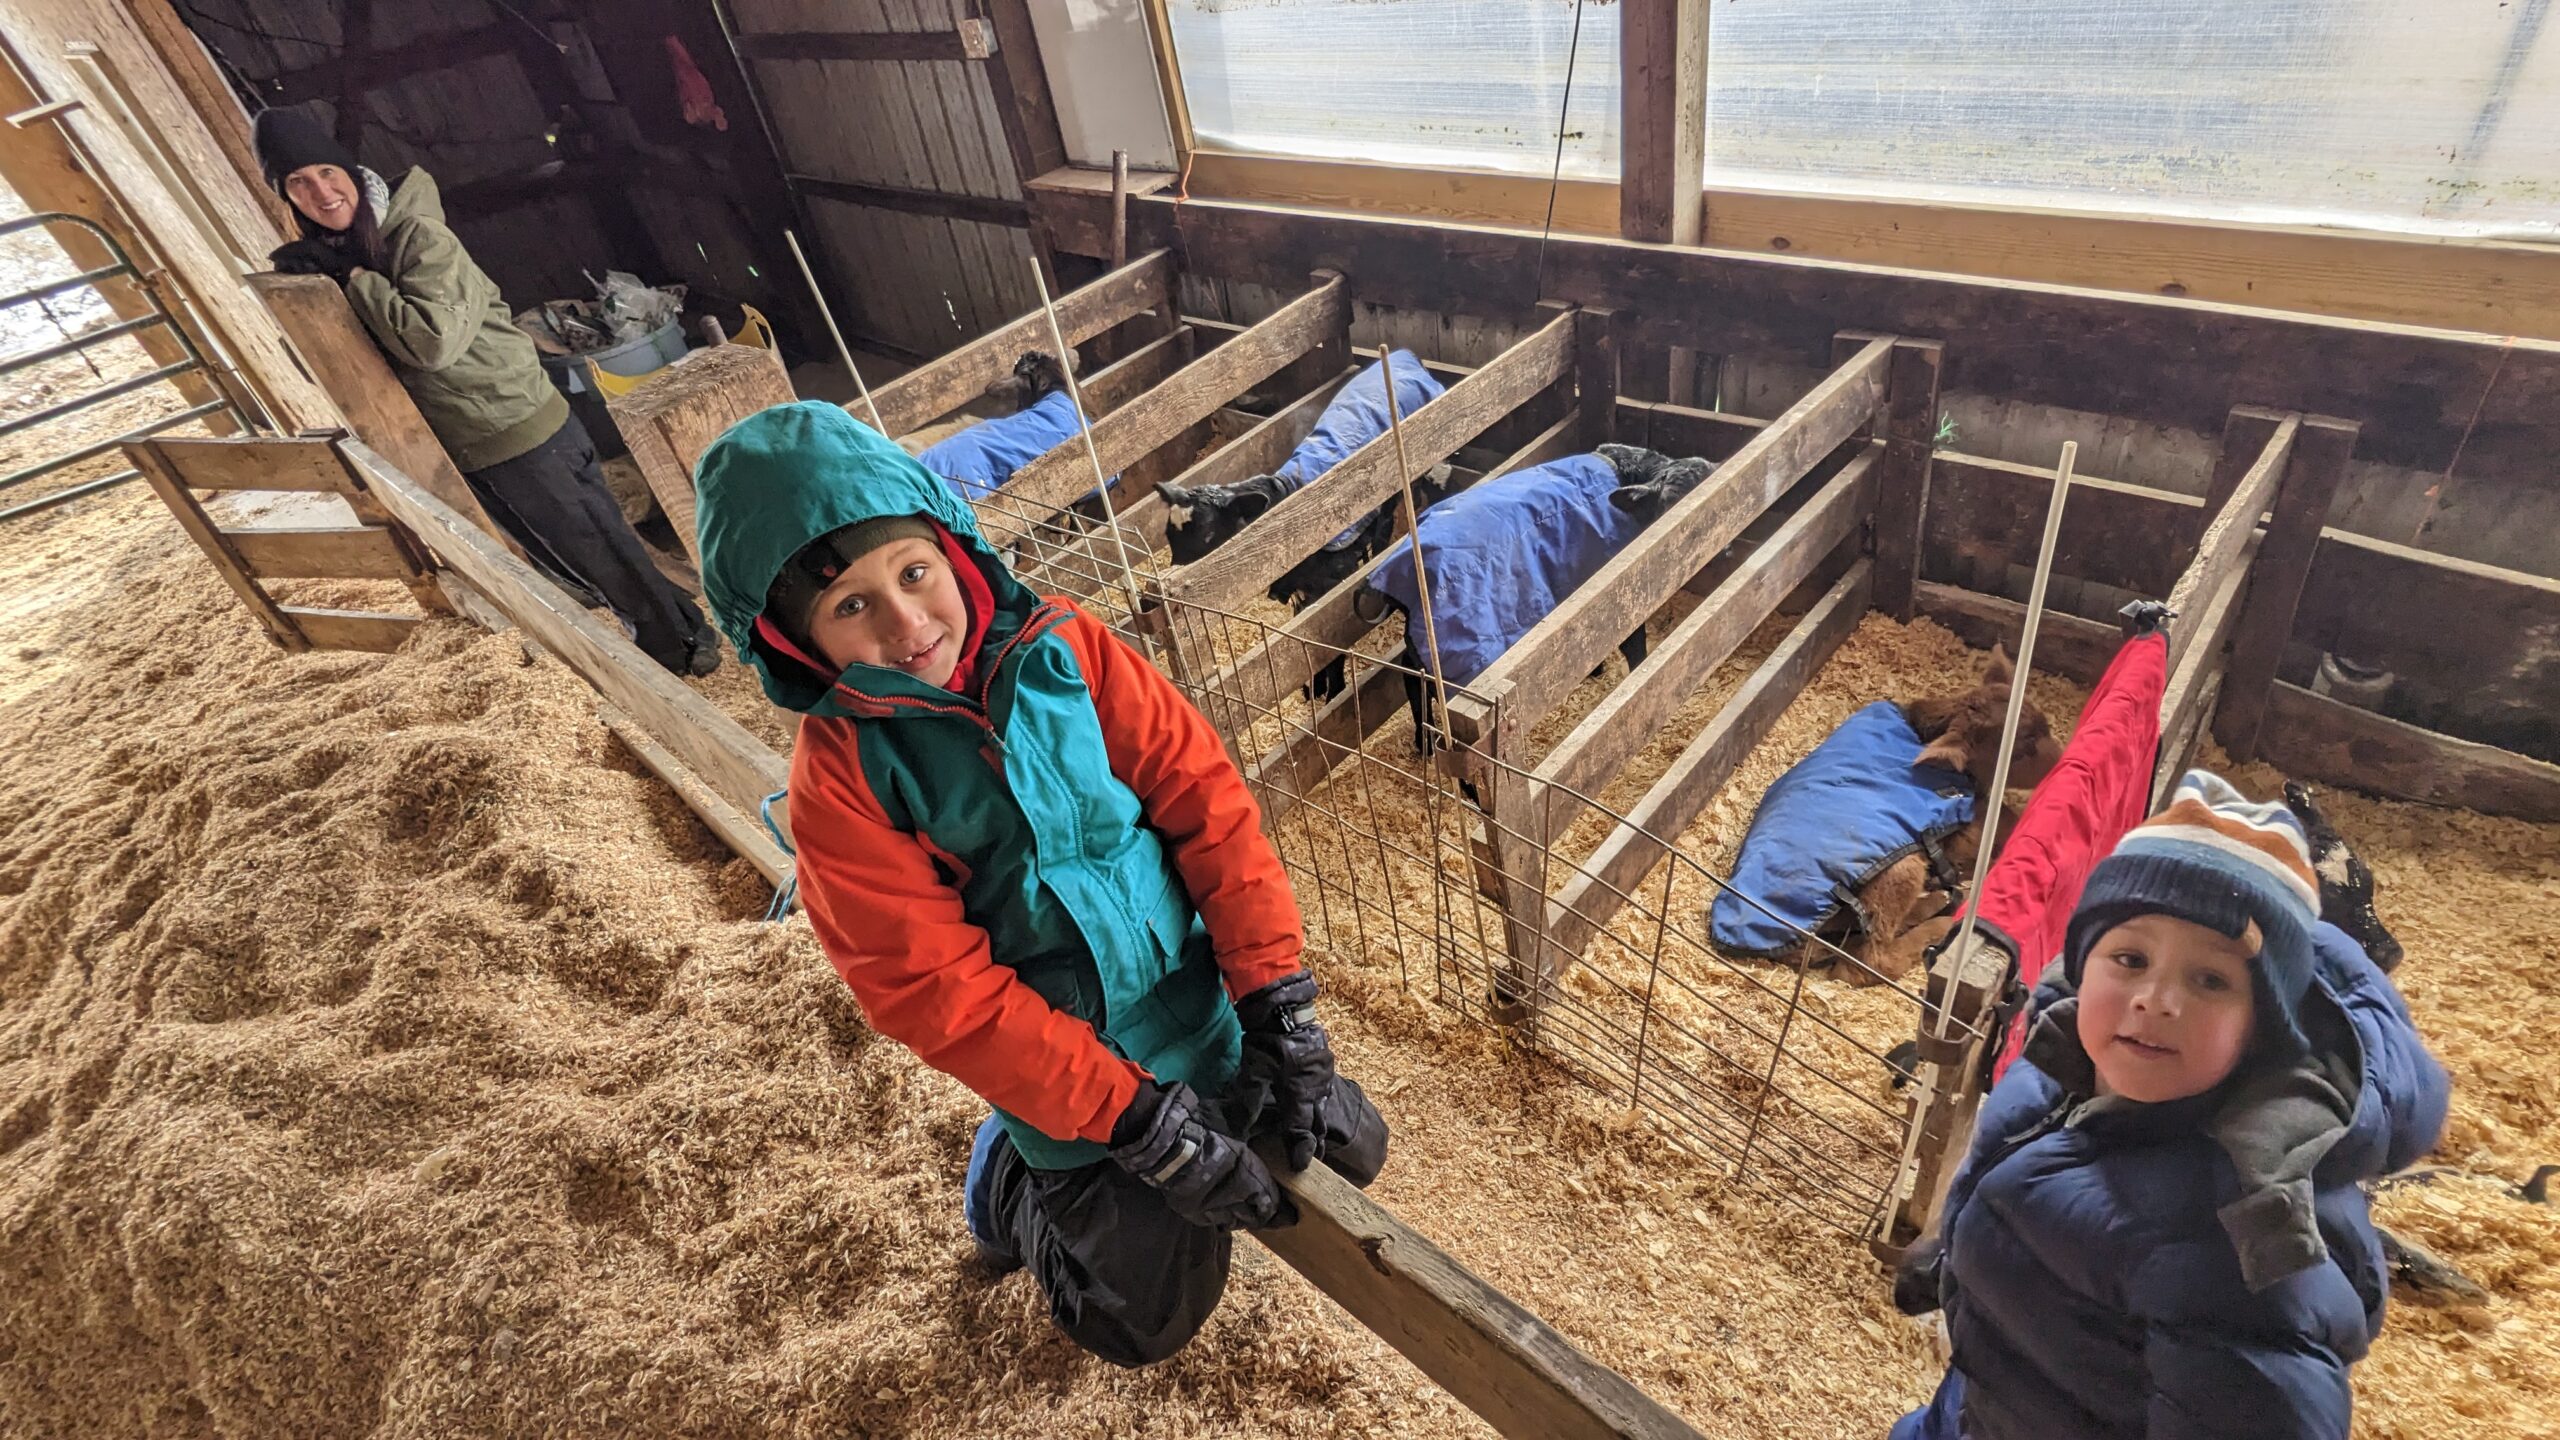 A woman farmer and her two young children, all wearing winter gear, inside a calf shed with a straw-covered ground and four newborn calves in bright blue jackets in the background.